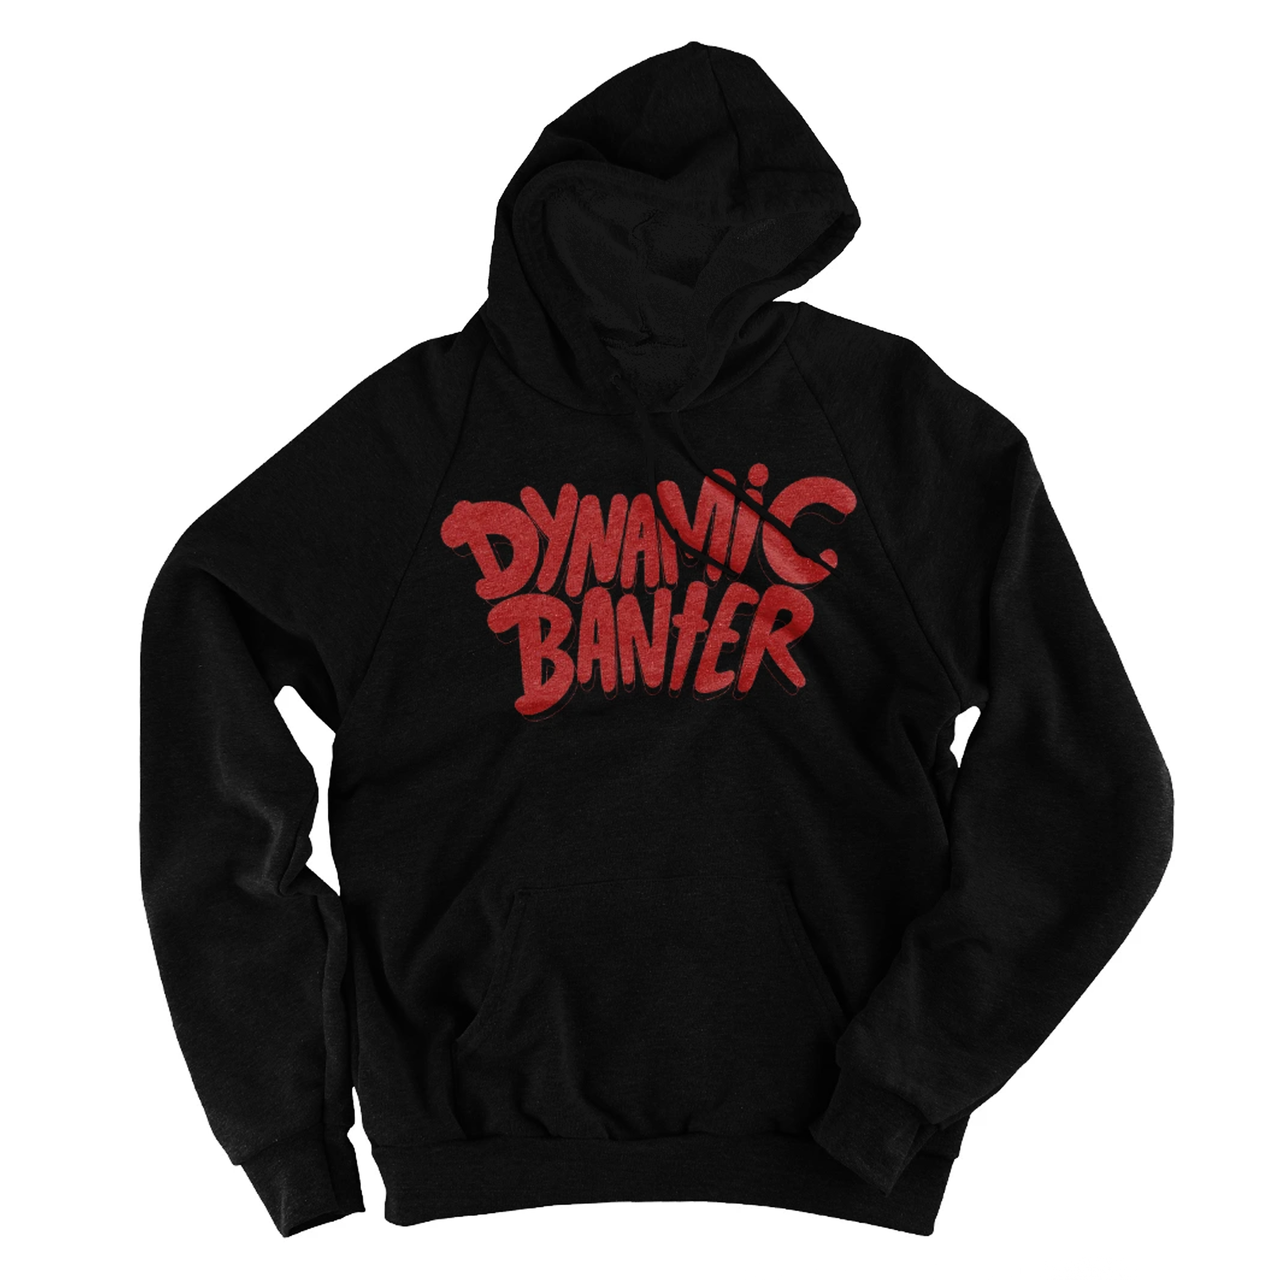 The Other Dynamic Banter Hoodie